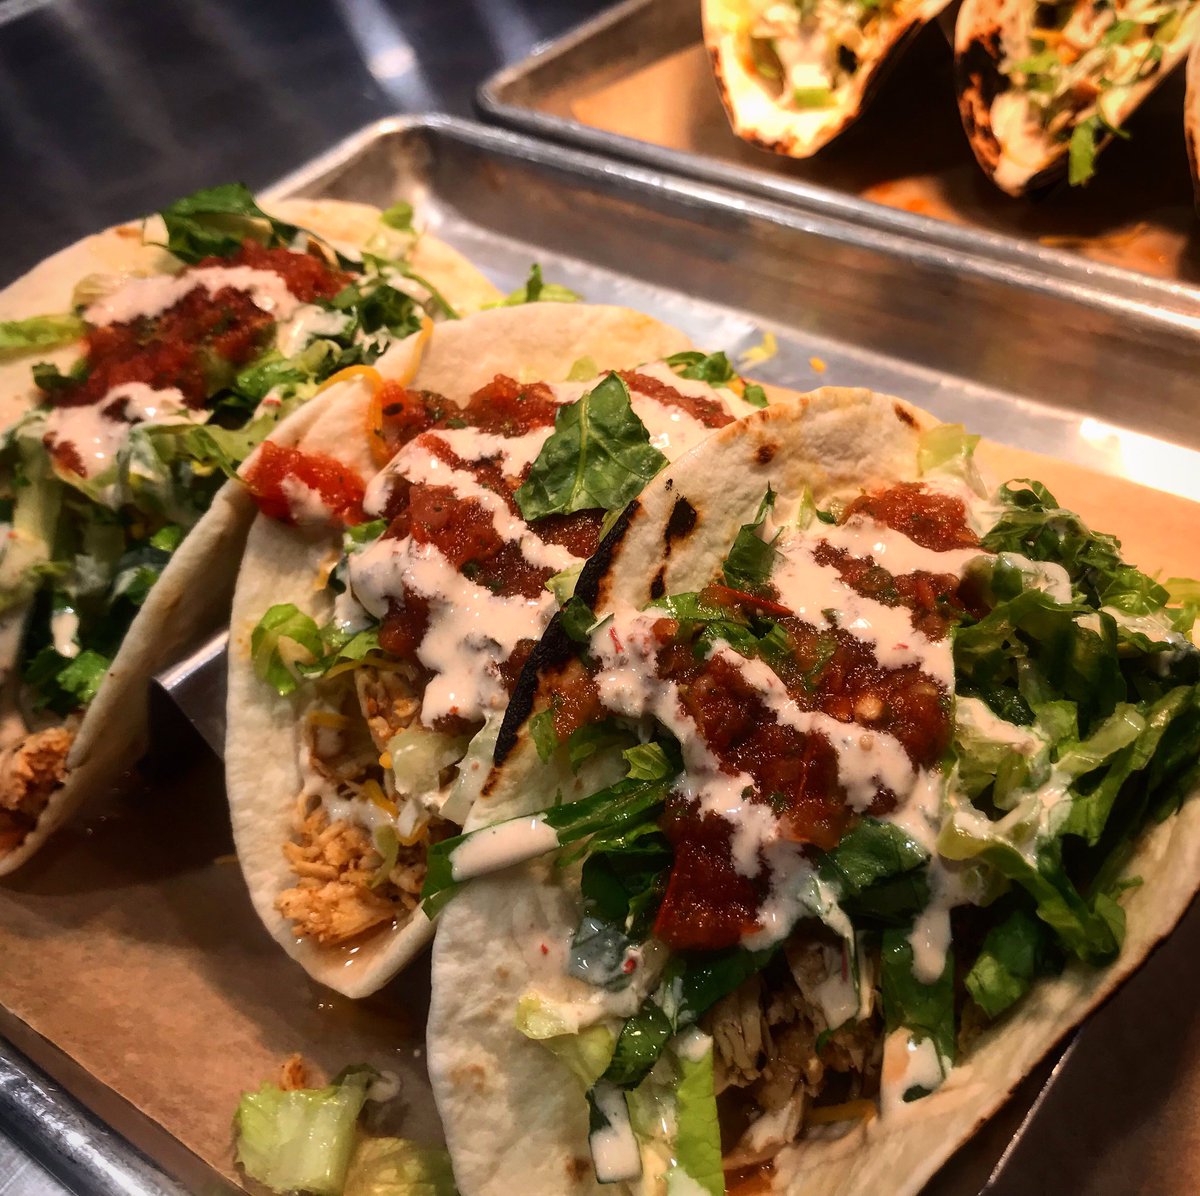 Tuesday’s are for tacos! Pulled chicken tacos are here to make your quarantine better 🌮🌮🌮 
•#bbq #indianasmokehouse #food #foodie #yum #tacos #chickentacos #bbqlovers #tacolover #tacotuesday #quarantine #eatlocal #supportsmallbusiness #smallbuisness #columbusindiana #indiana